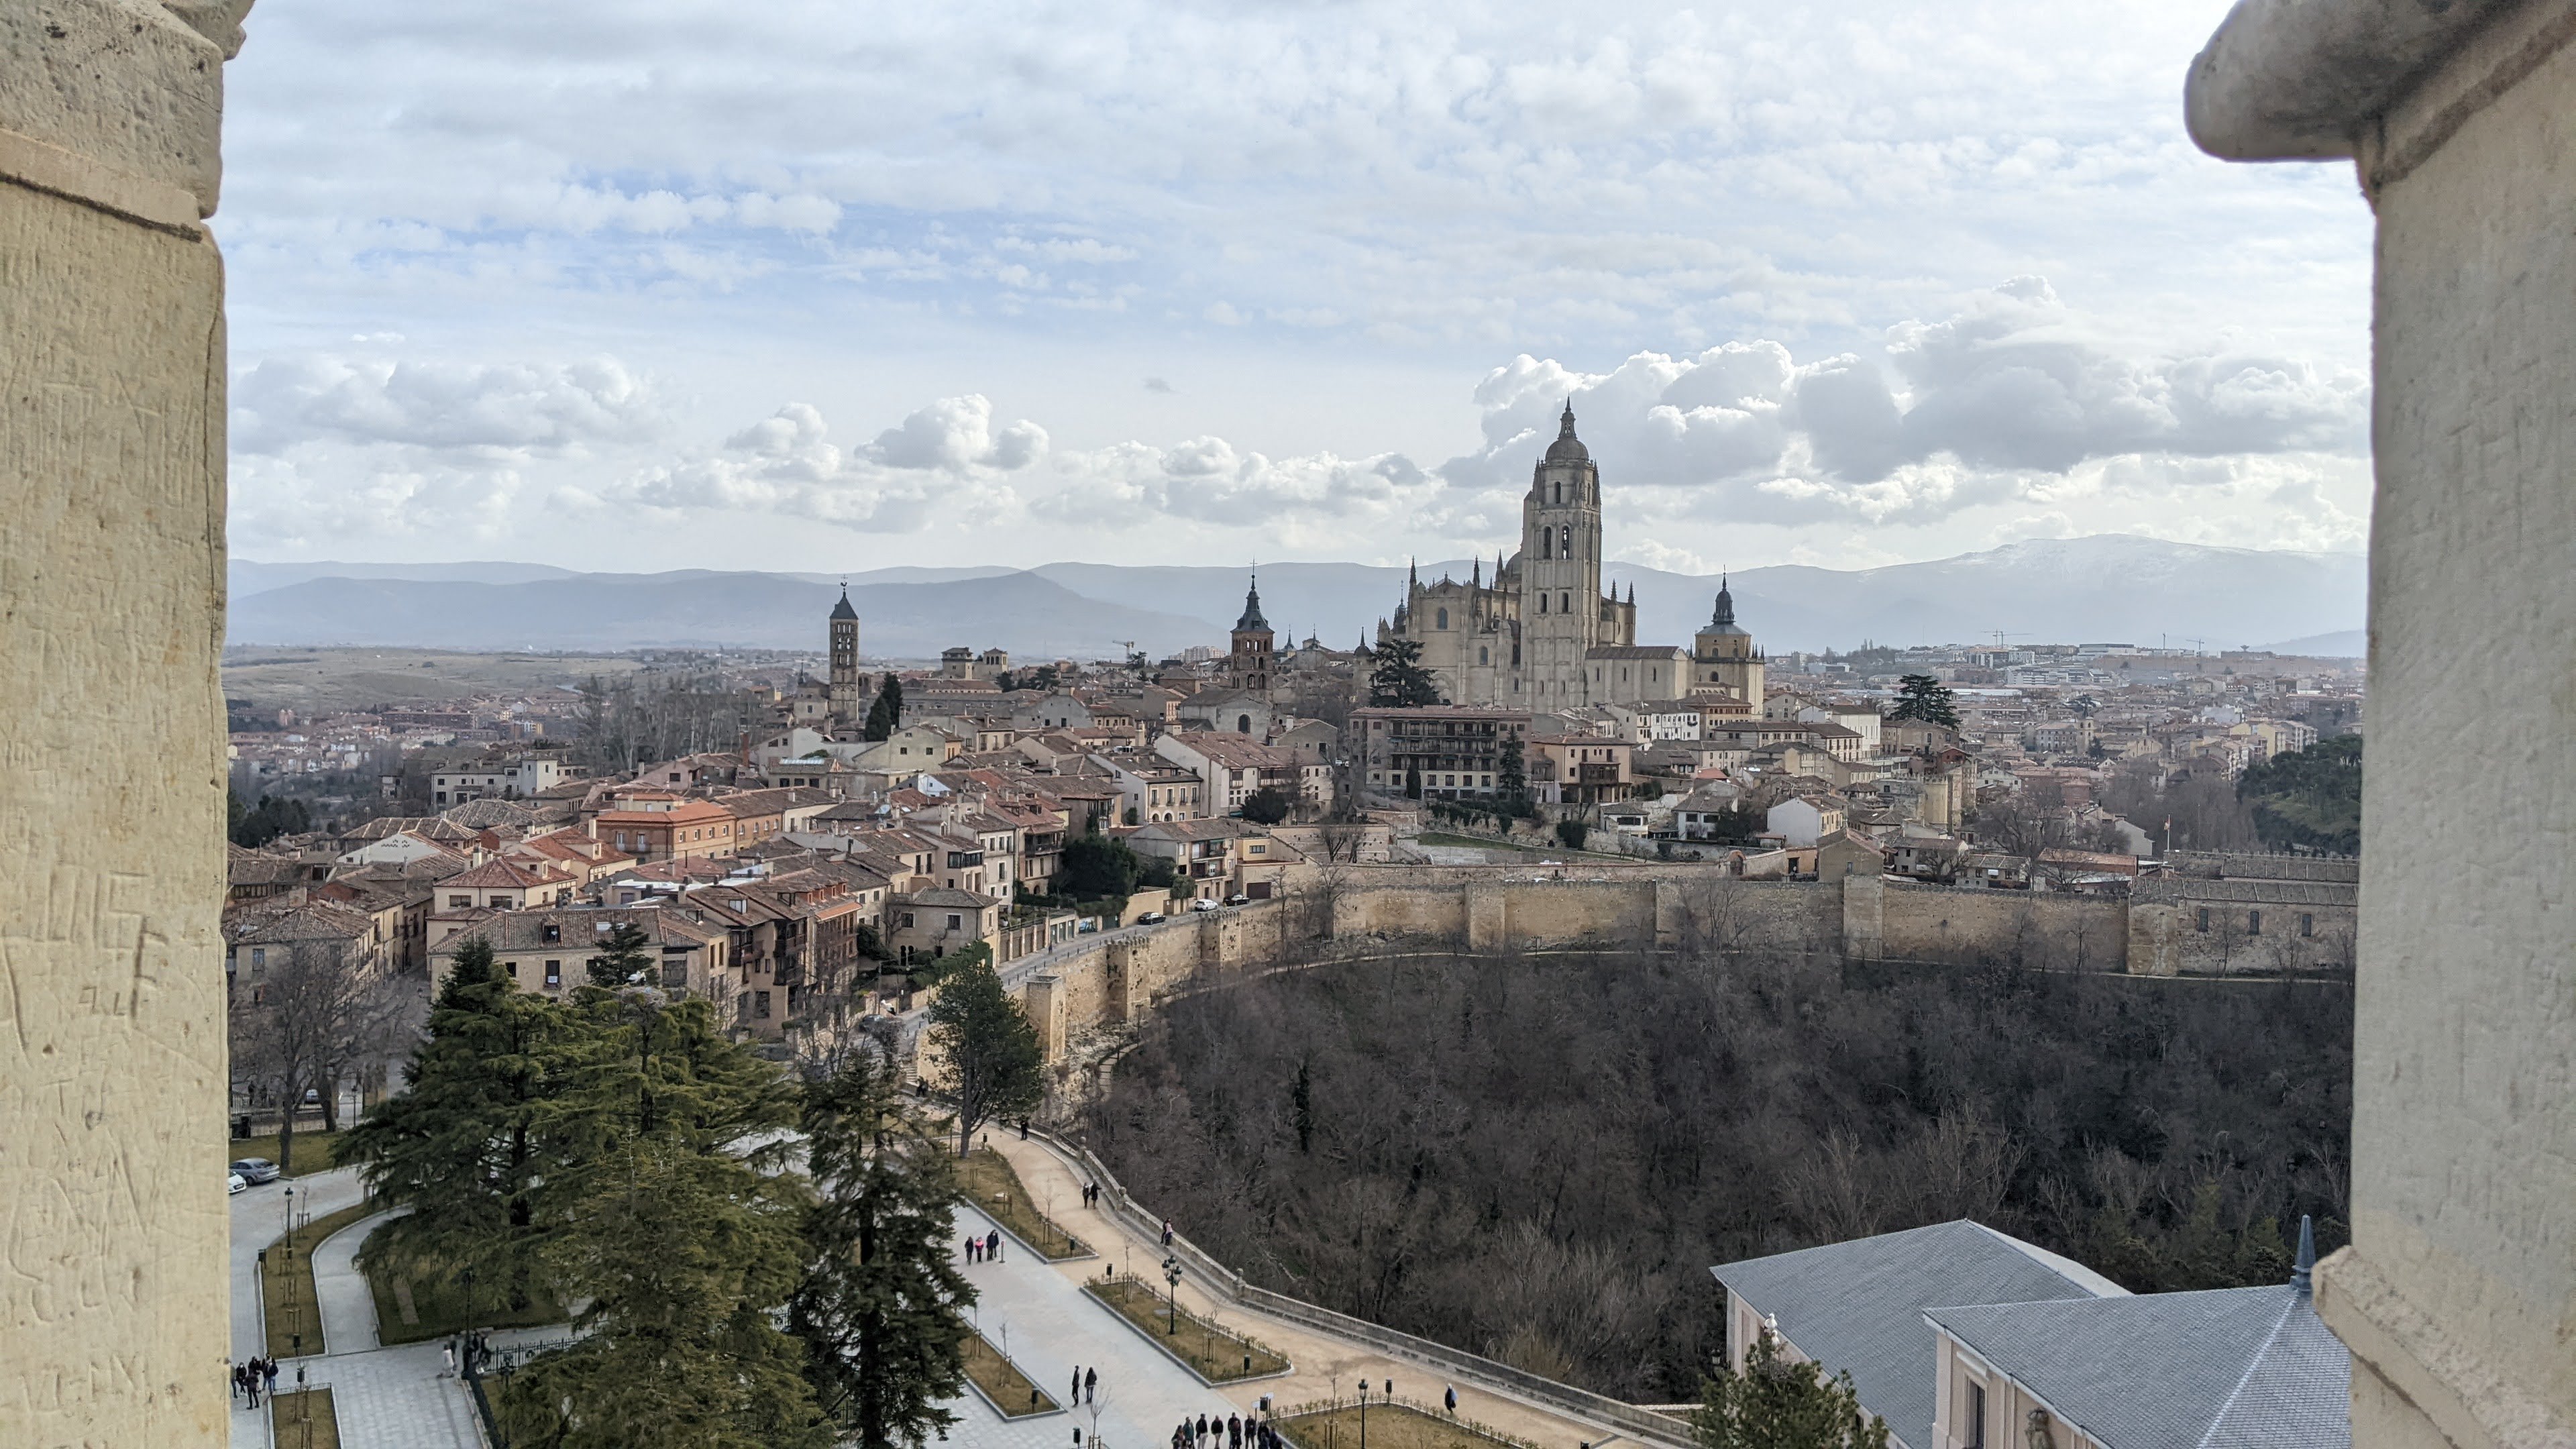 Proctor en Segovia enjoys views of the old quarter where the center is located